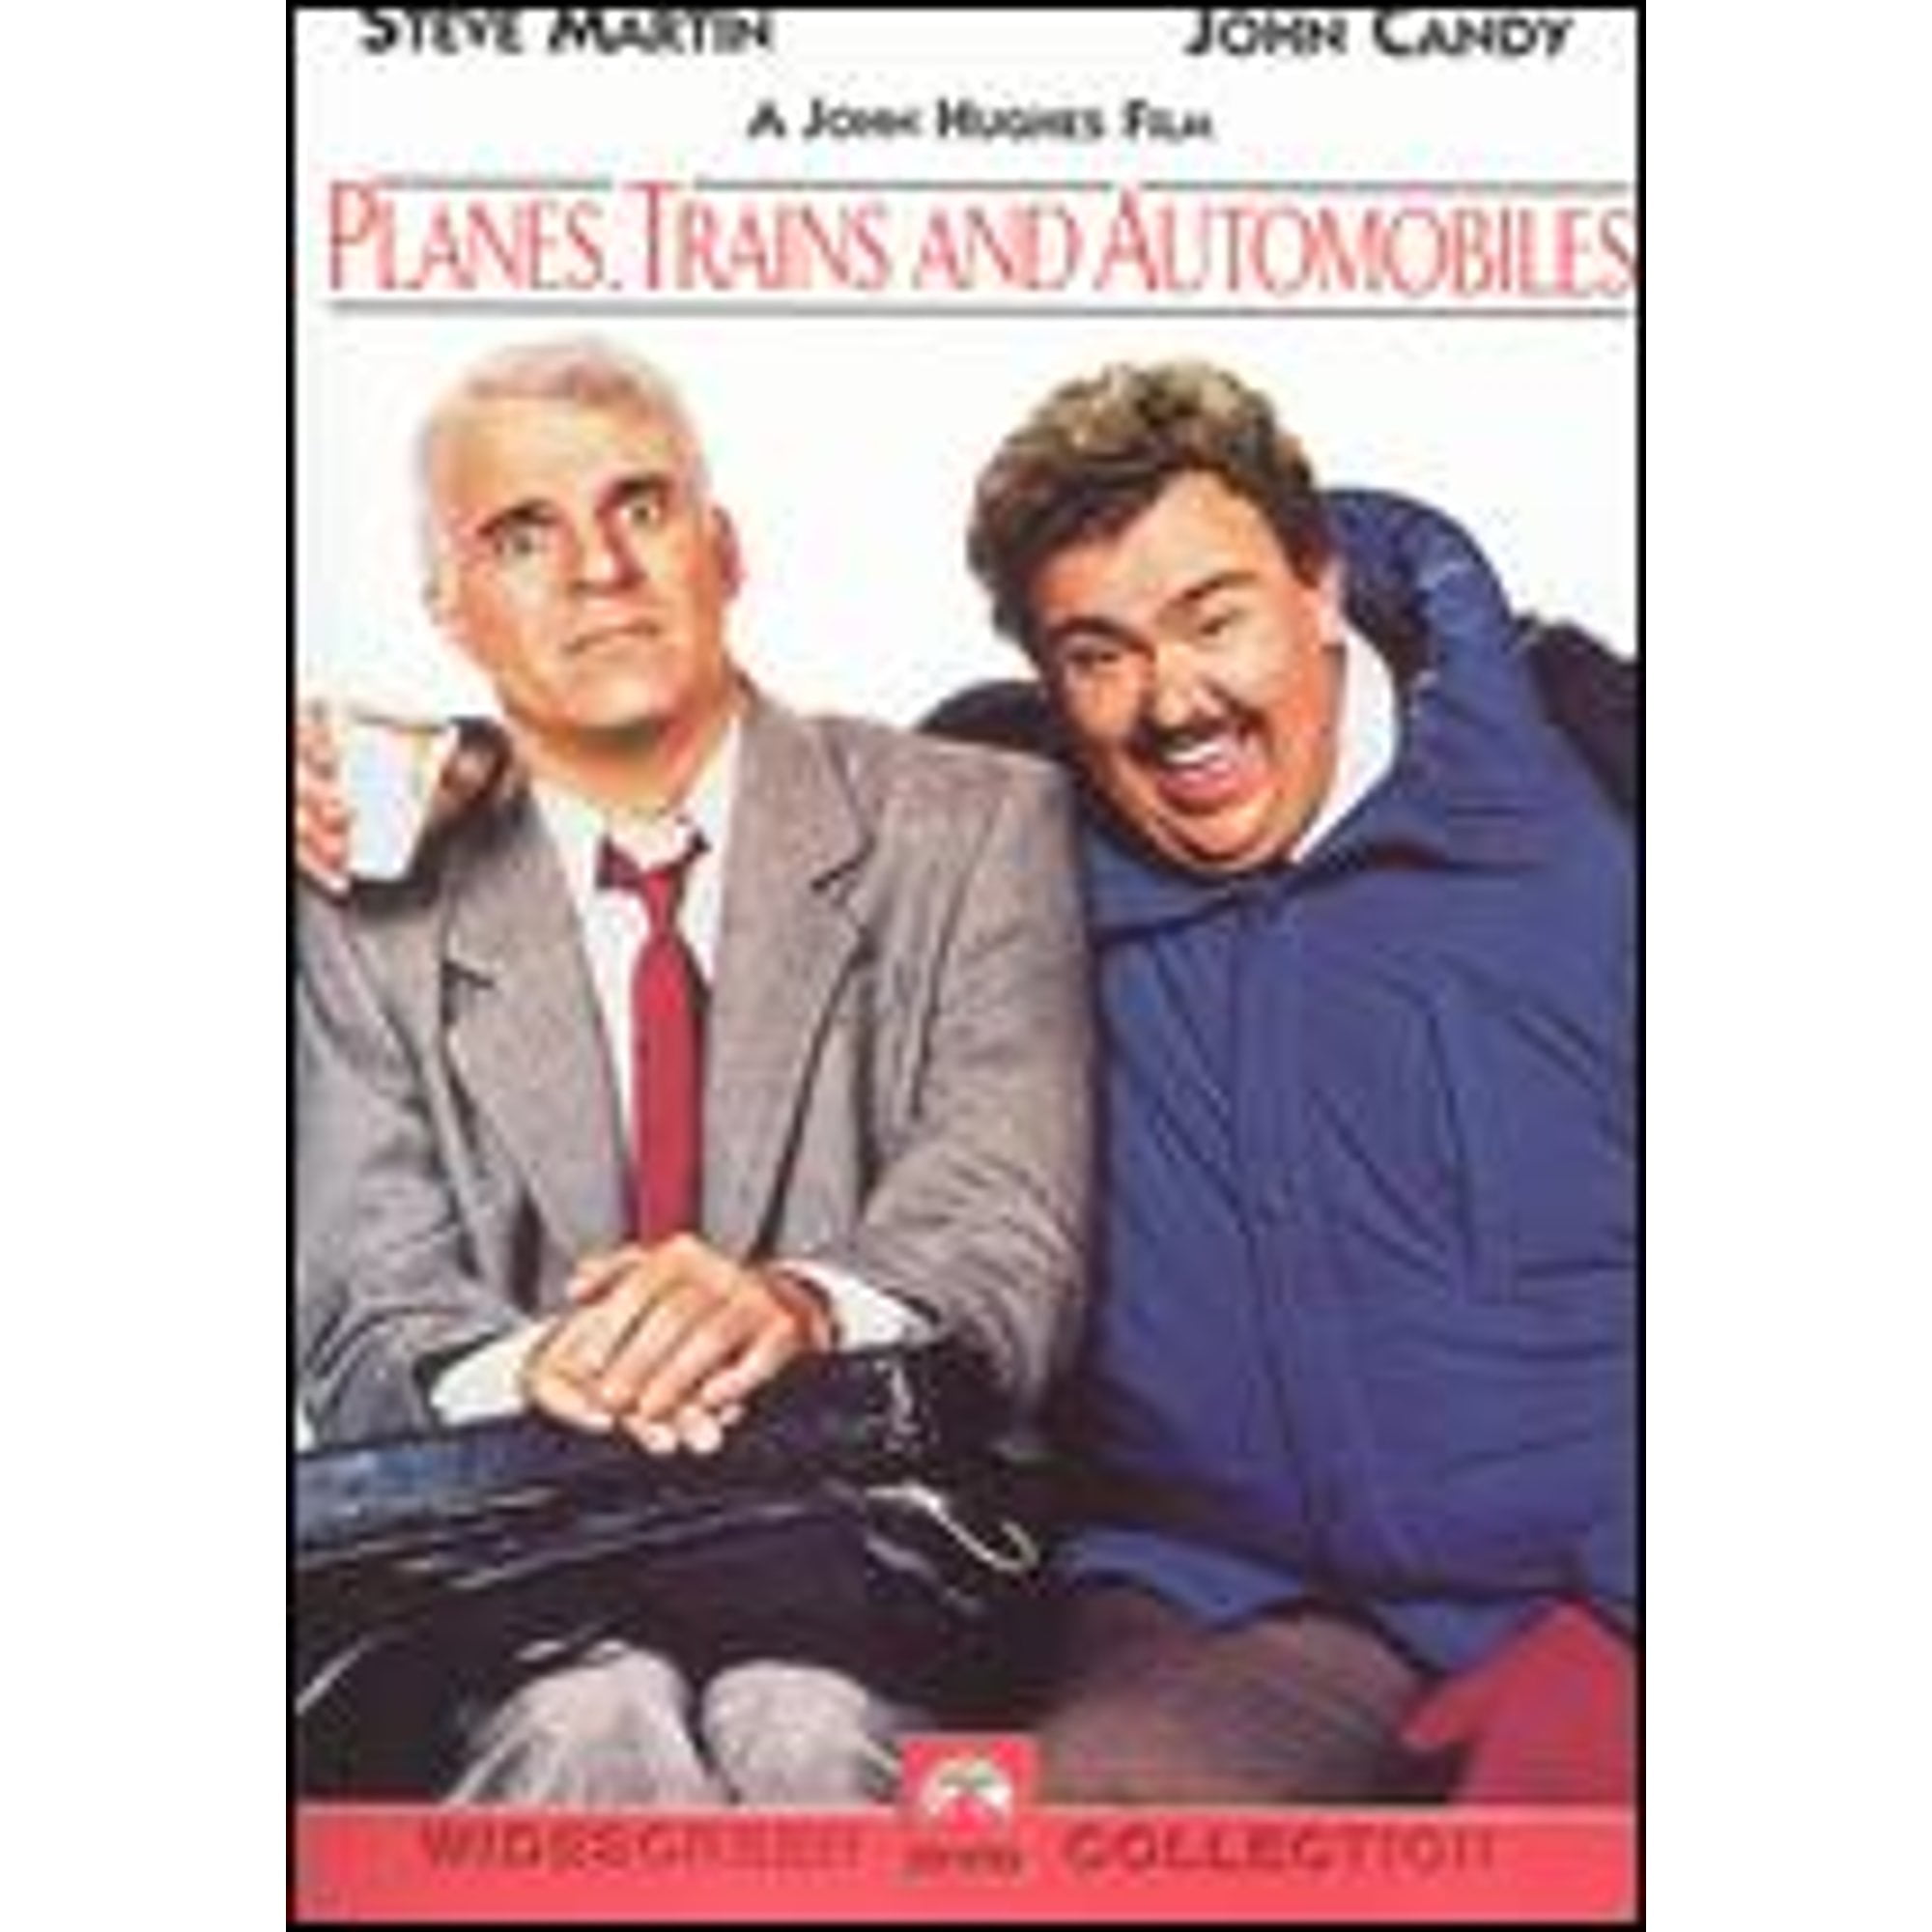 Pre-Owned Planes, Trains and Automobiles (DVD 0097363203643) directed by John Hughes